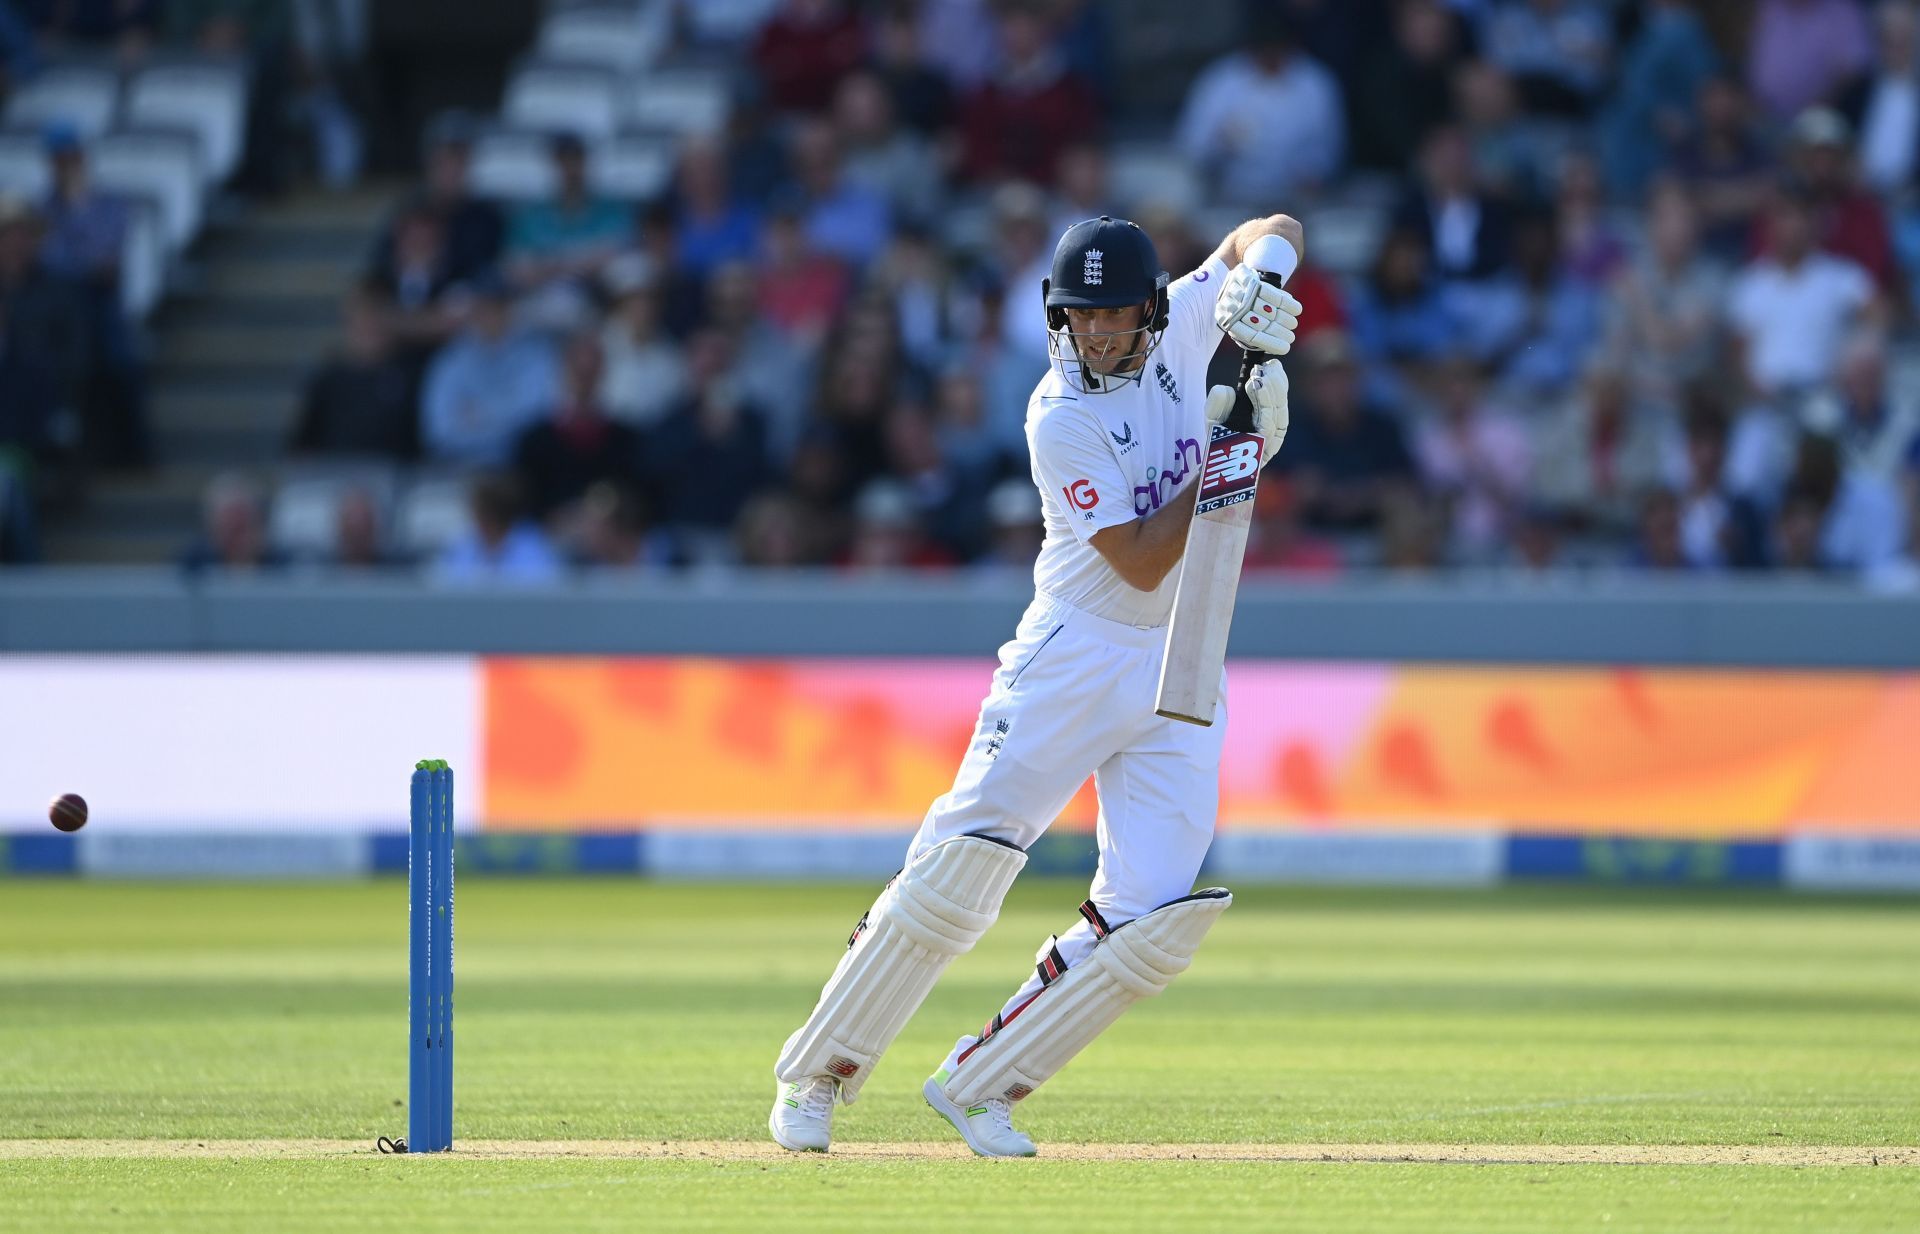 Joe Root failed to make an impact with the bat on day 1 (Credit: Getty Images)